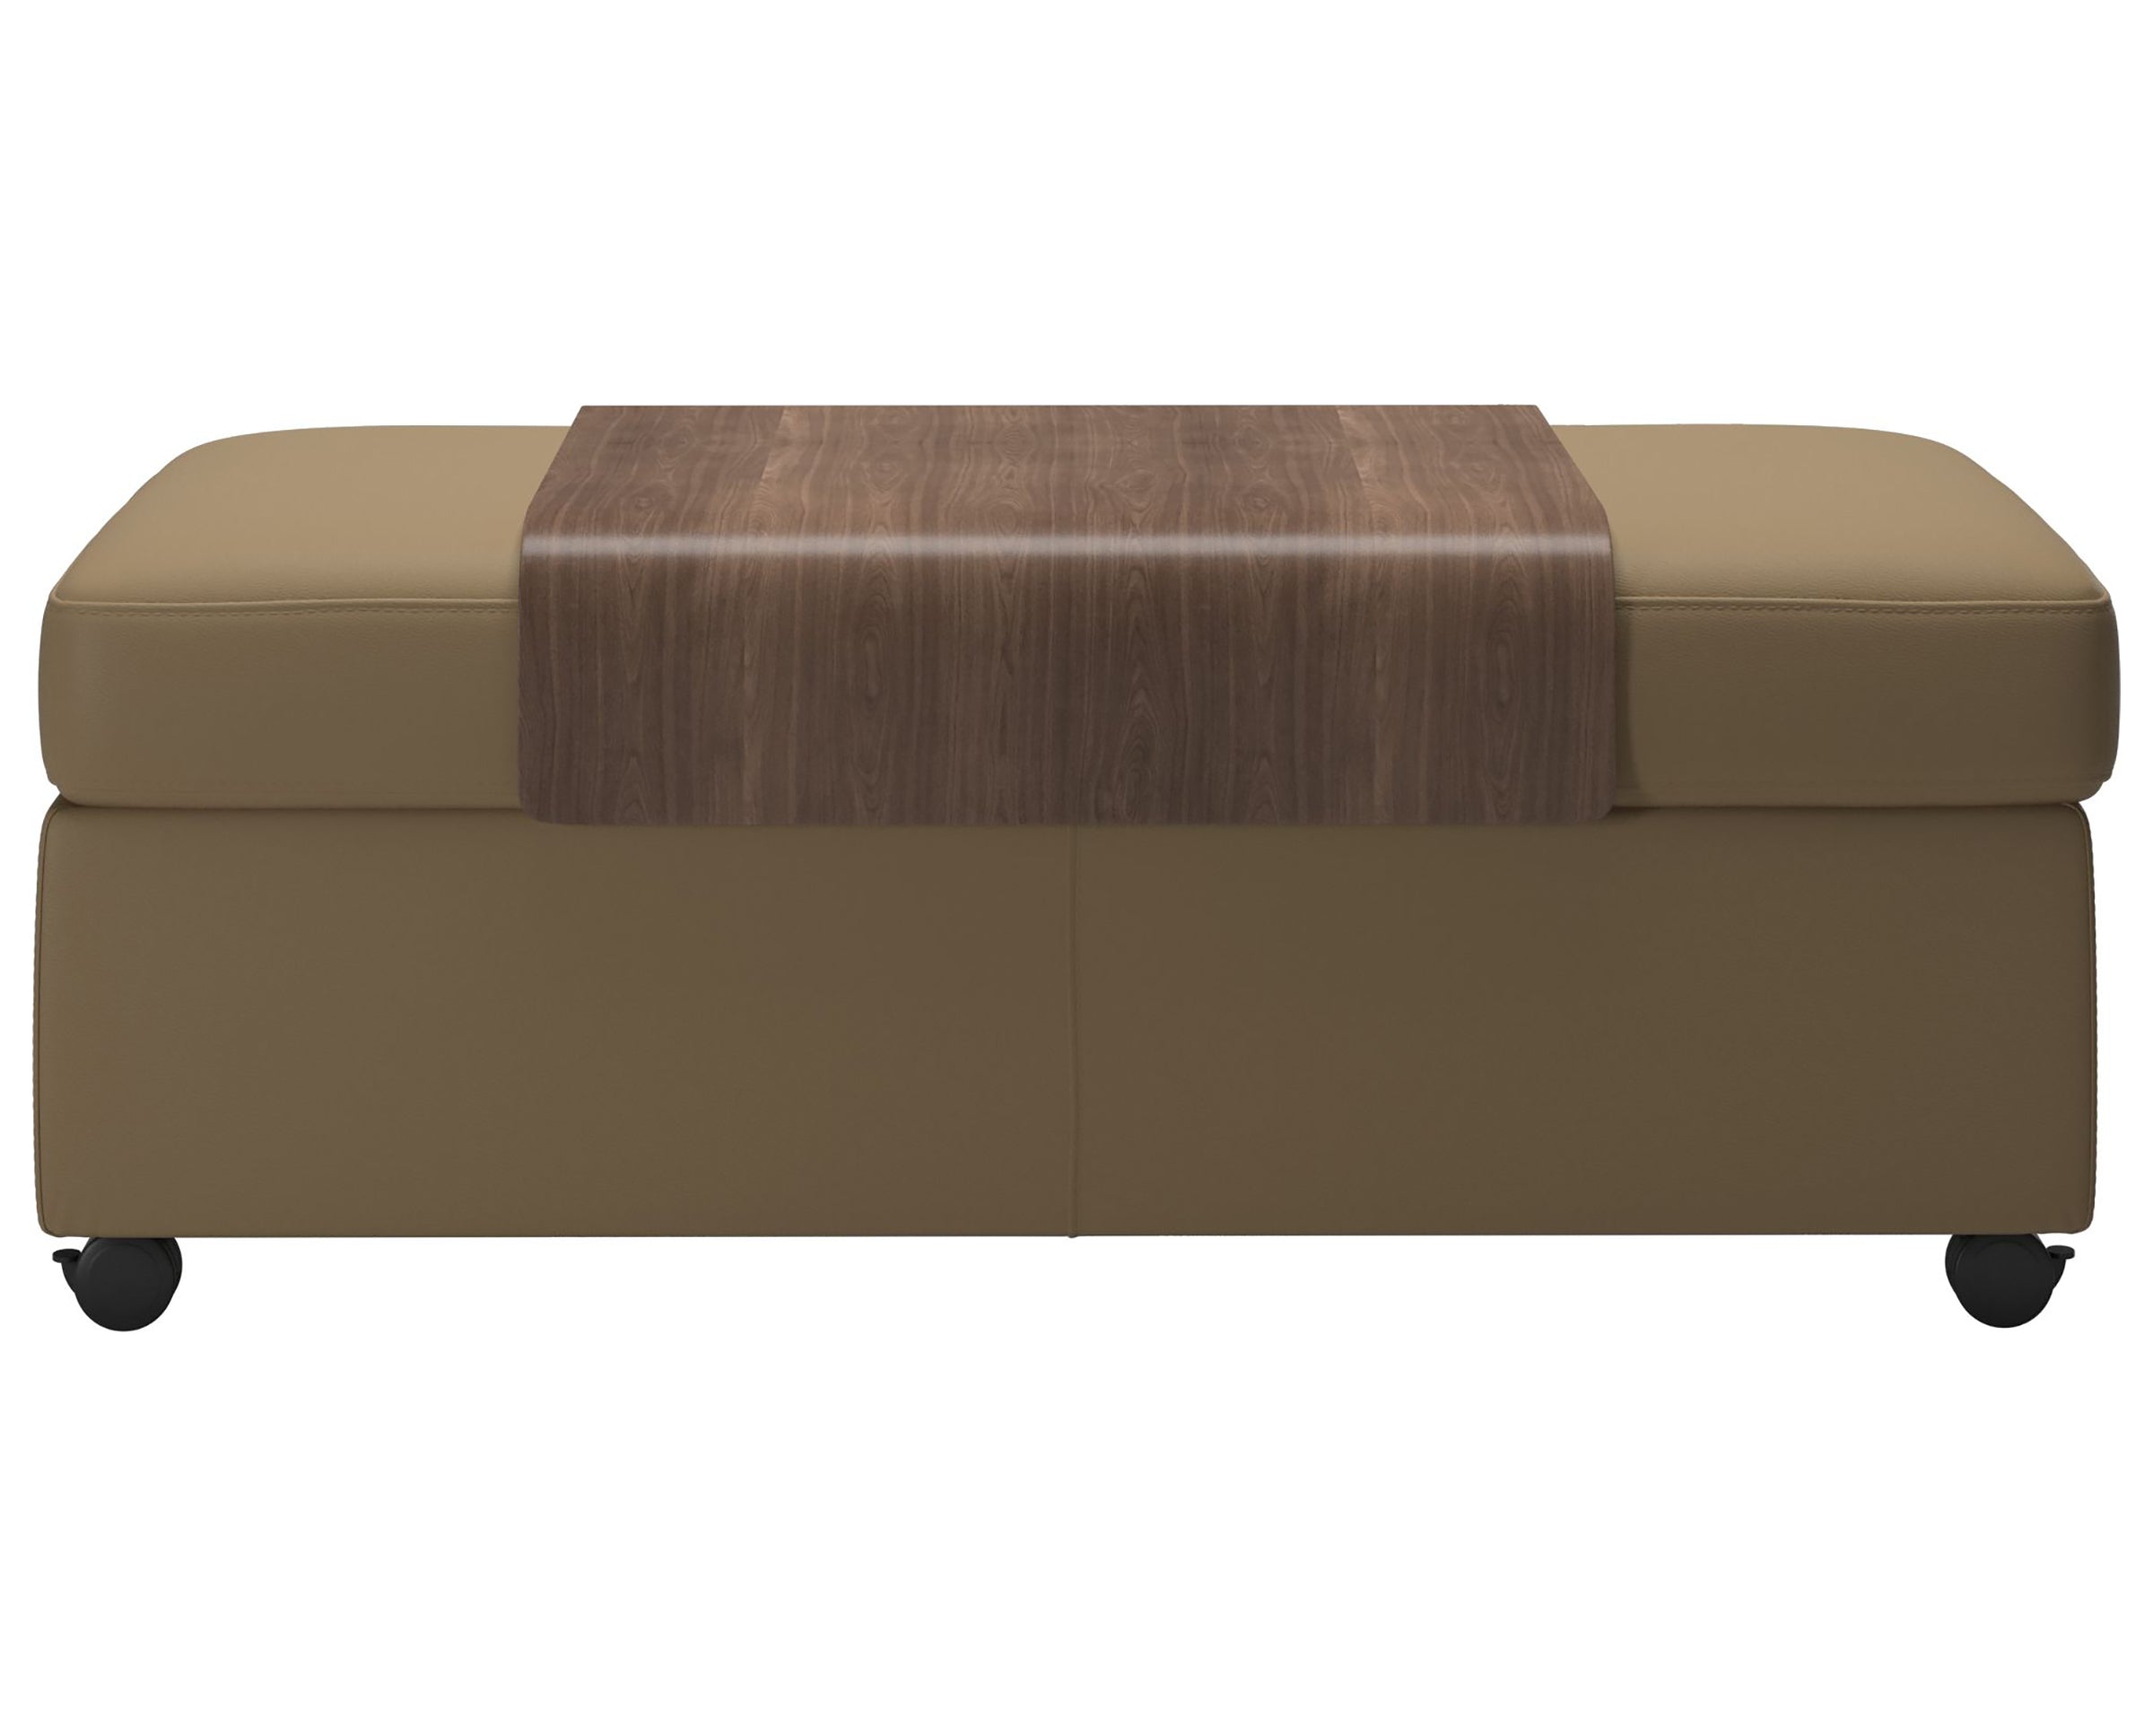 Paloma Leather Sand and Walnut Finish | Stressless Double Ottoman with Table | Valley Ridge Furniture